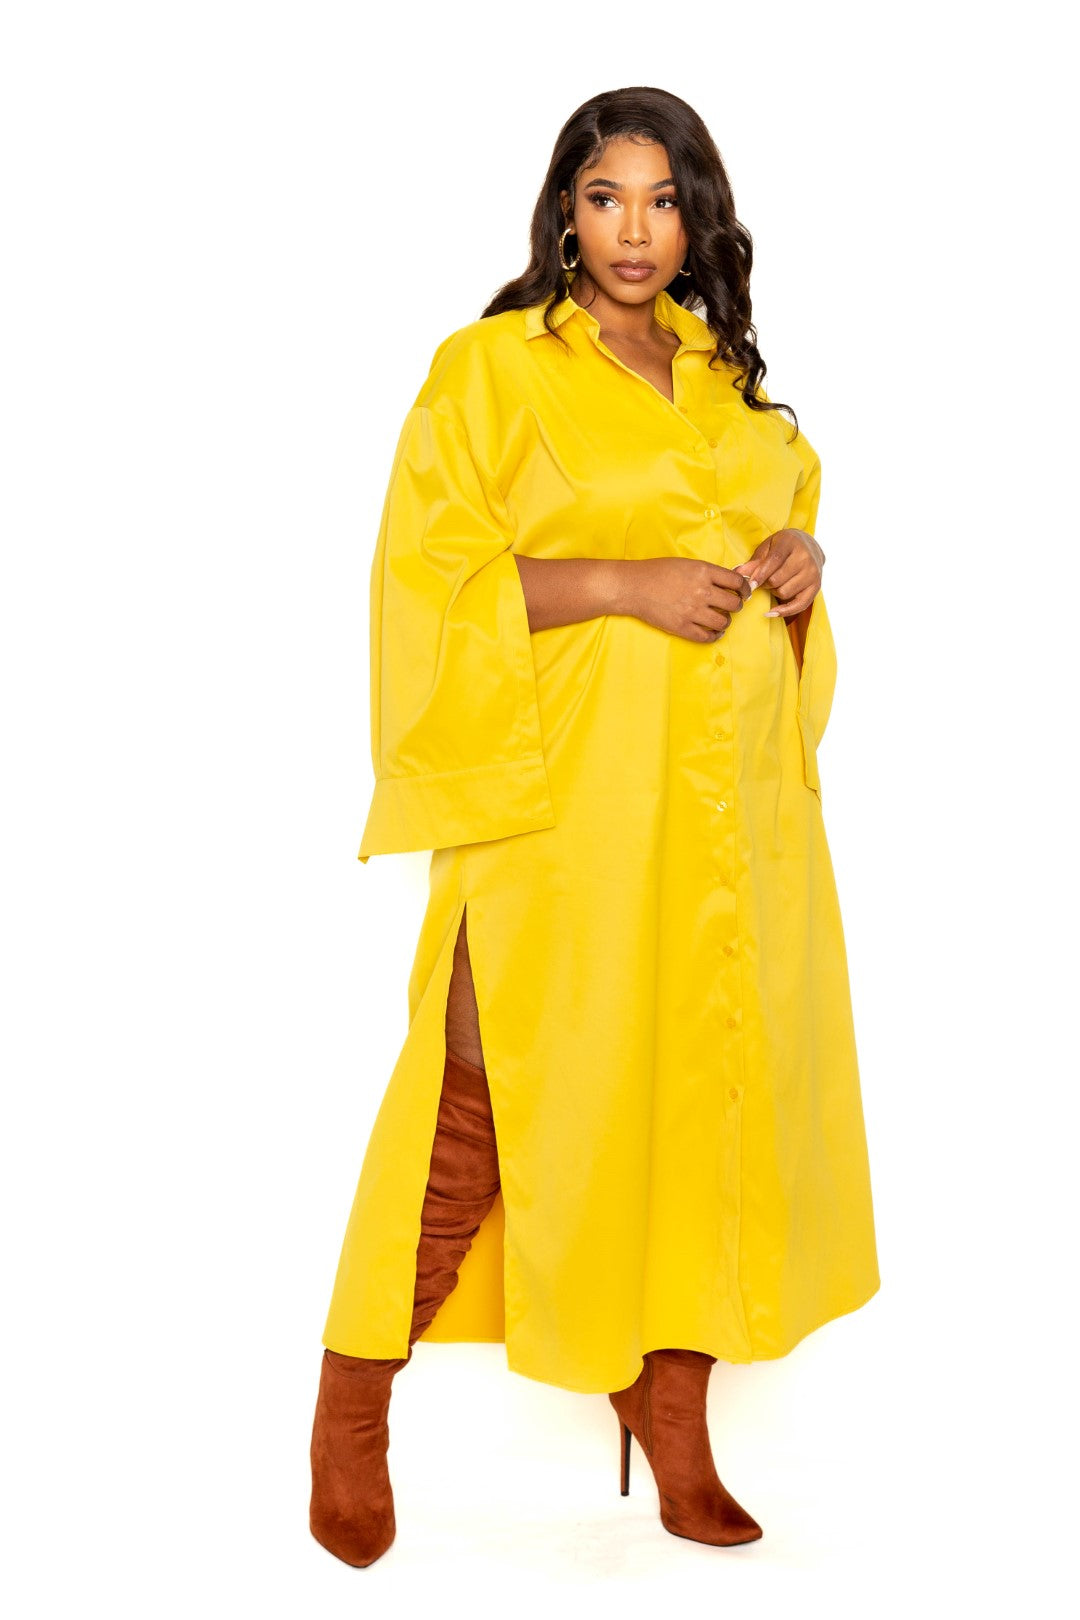 Plus Size Cape Sleeve Shirt Dress CCPRODUCTS, NEW ARRIVALS, PLUS SIZE, PLUS SIZE DRESSES Style Your Curves